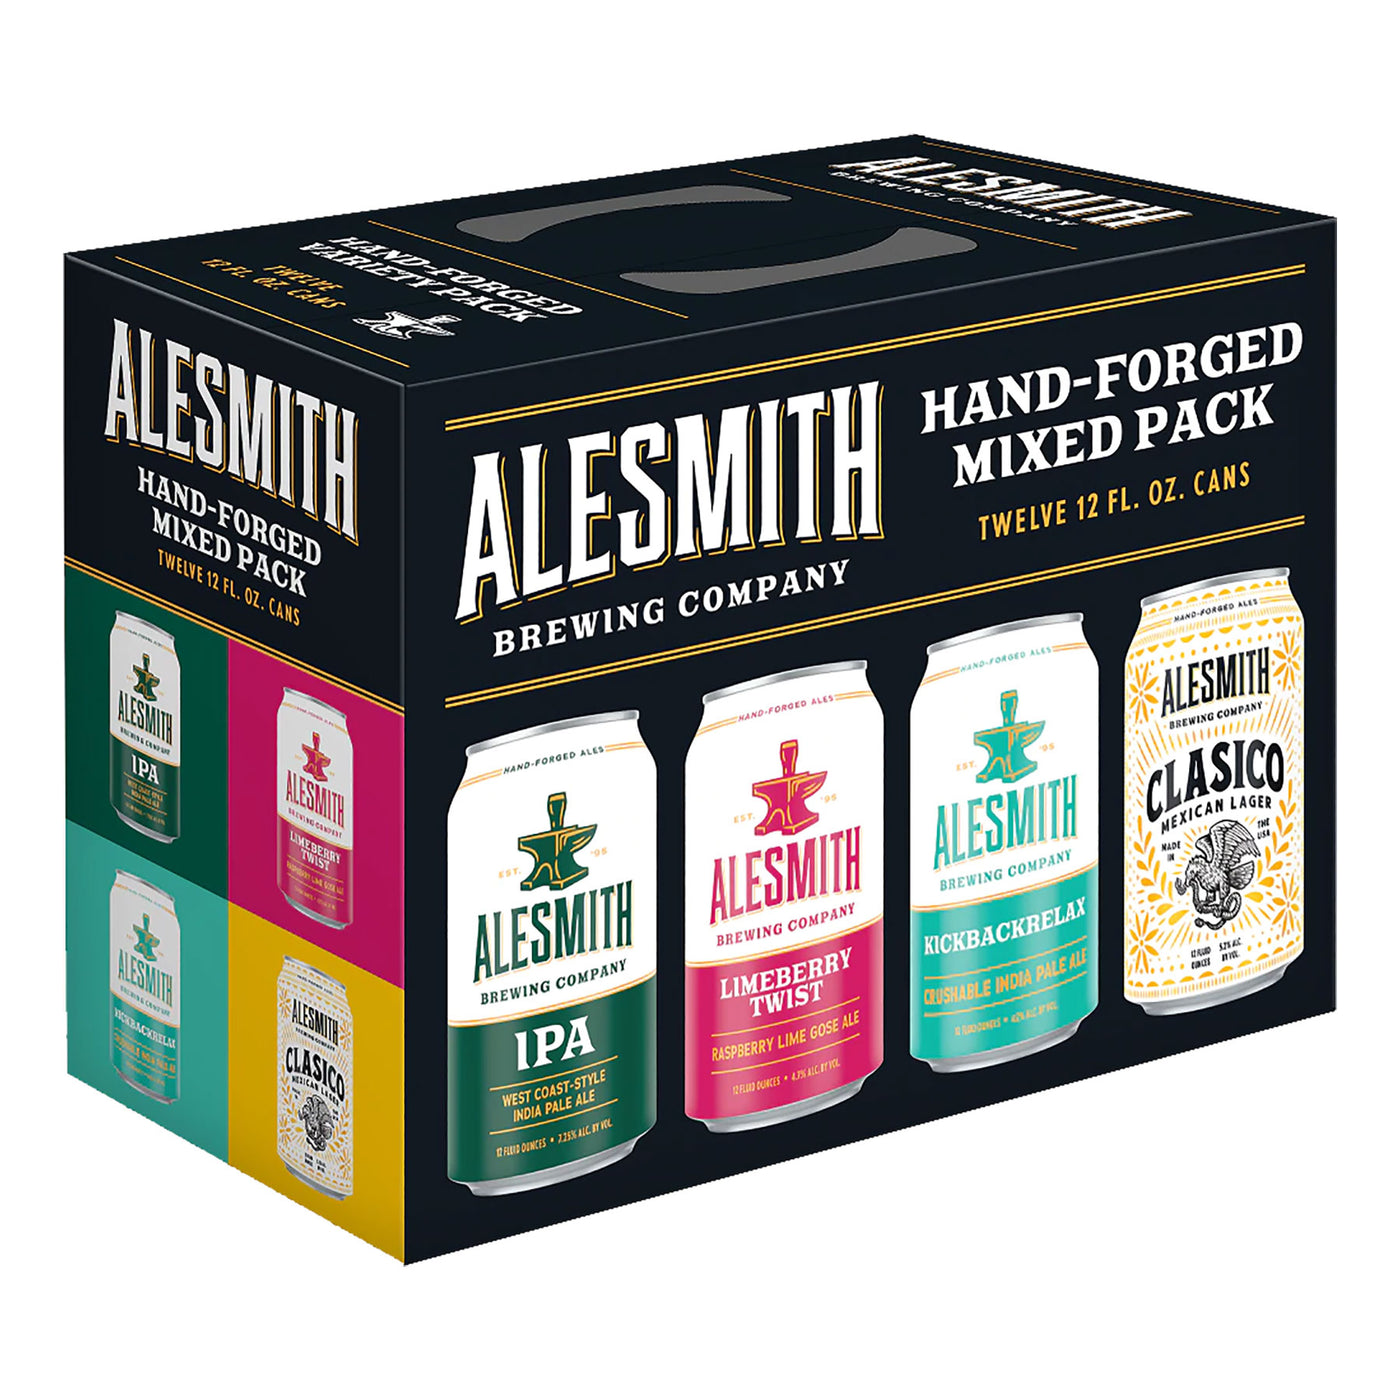 AleSmith Hand-Forged Mix Pack